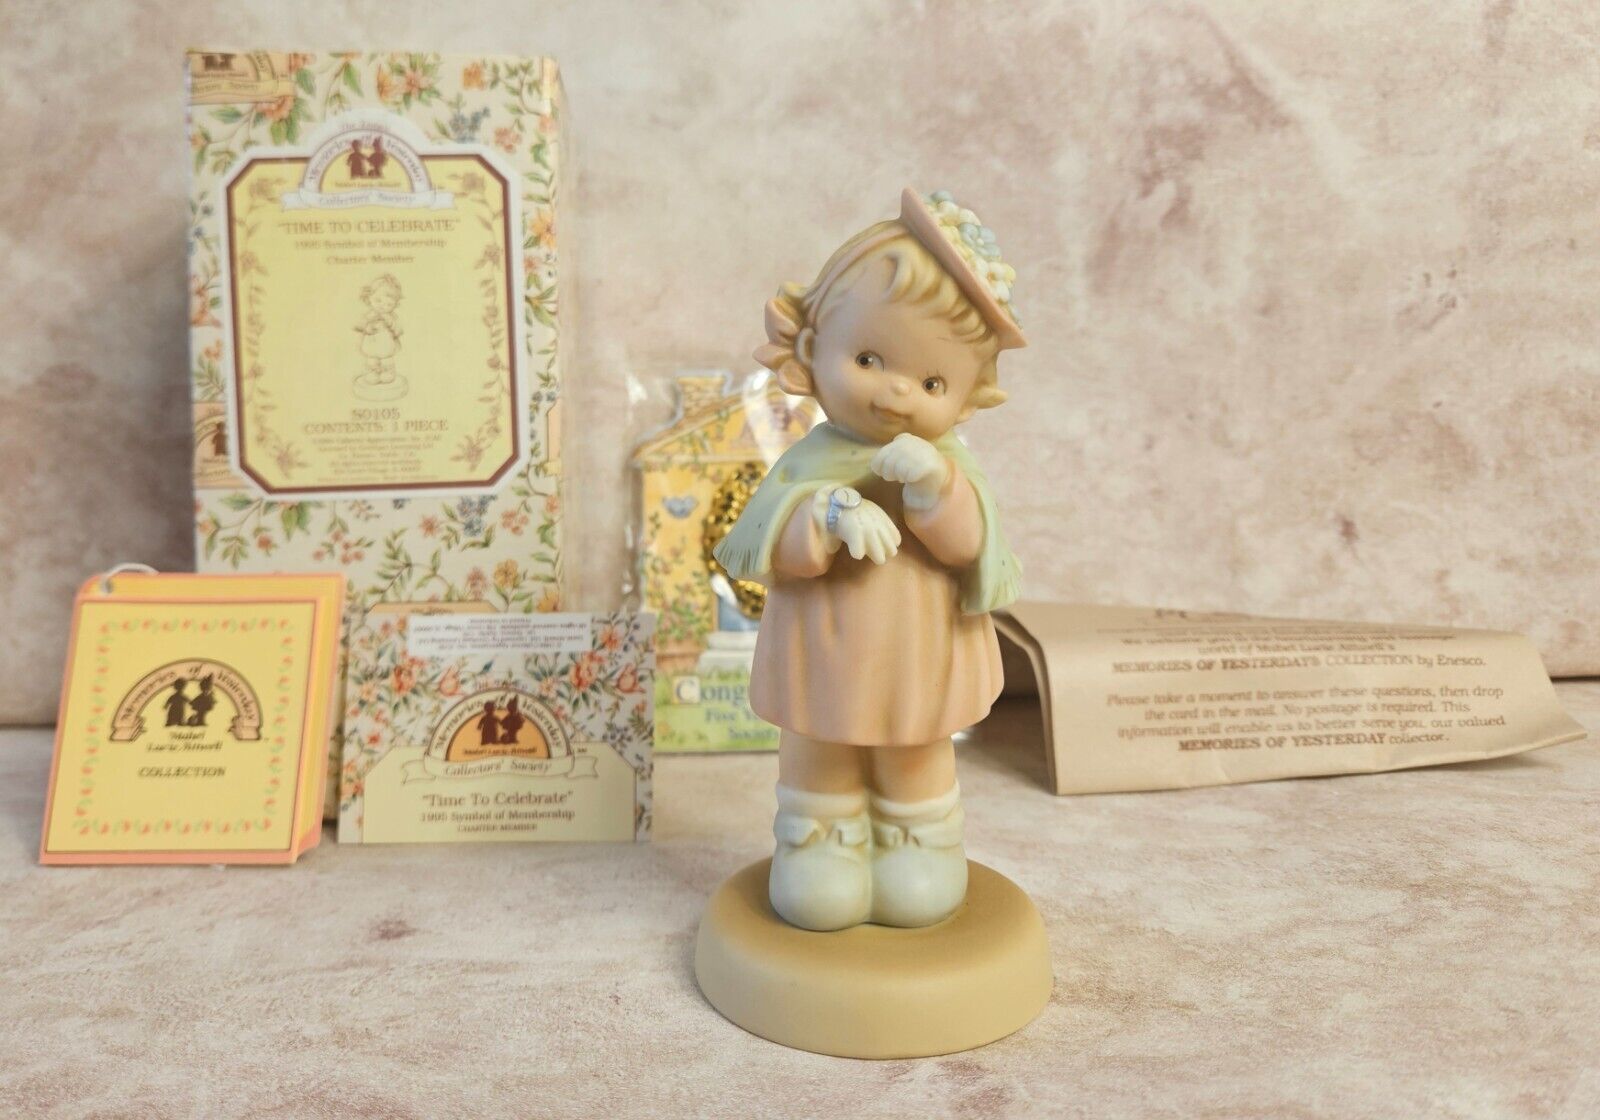 Vtg Enesco Memories of Yesterday Figurine Time To Celebrate S0105 WITH 5YR BADGE